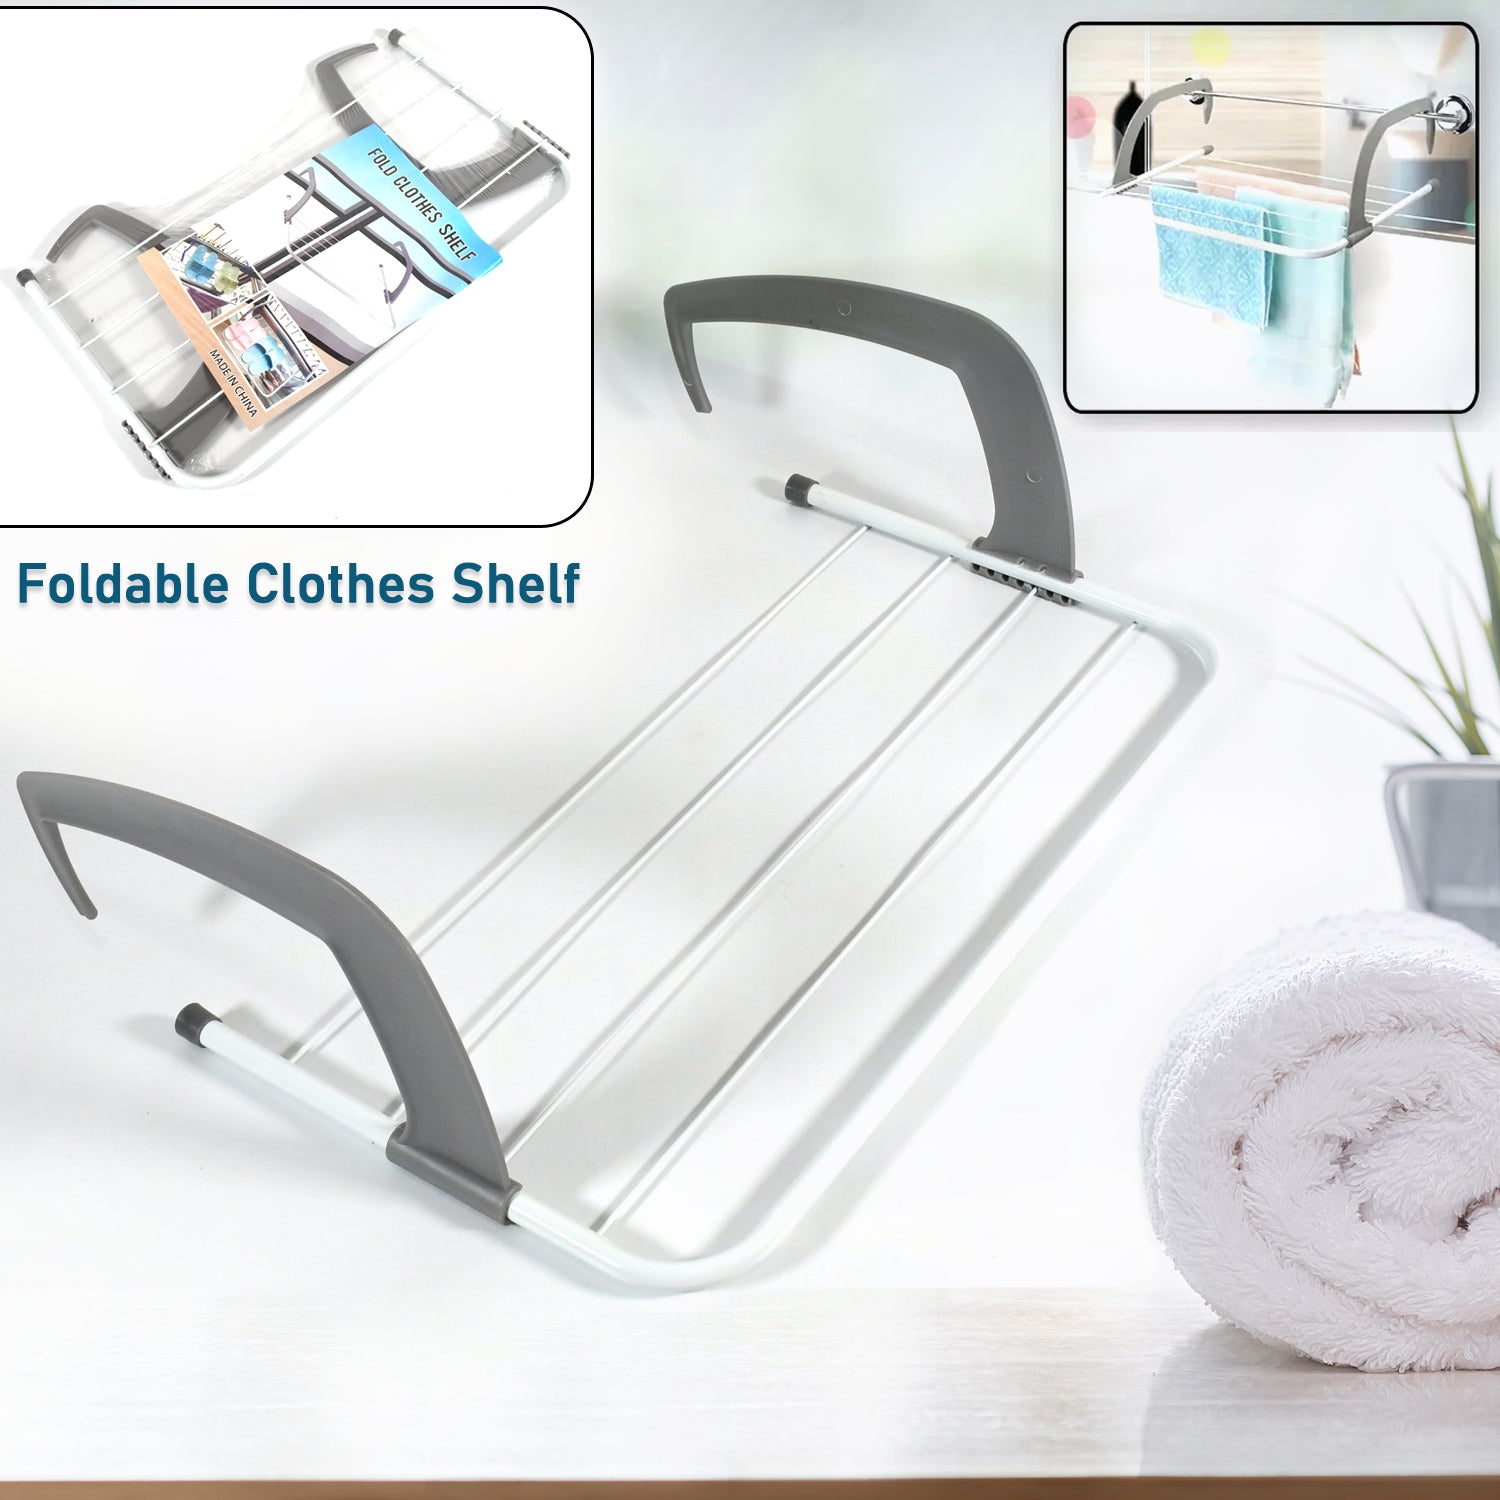 0333 Metal Steel Folding Drying Rack for Clothes Balcony Laundry Hanger for Small Clothes Drying Hanger Metal Clothes Drying Stand, Socks and Plant Storage Holder Outdoor / Indoor Clothes-Towel Drying Rack Hanging on The Door Bathroom